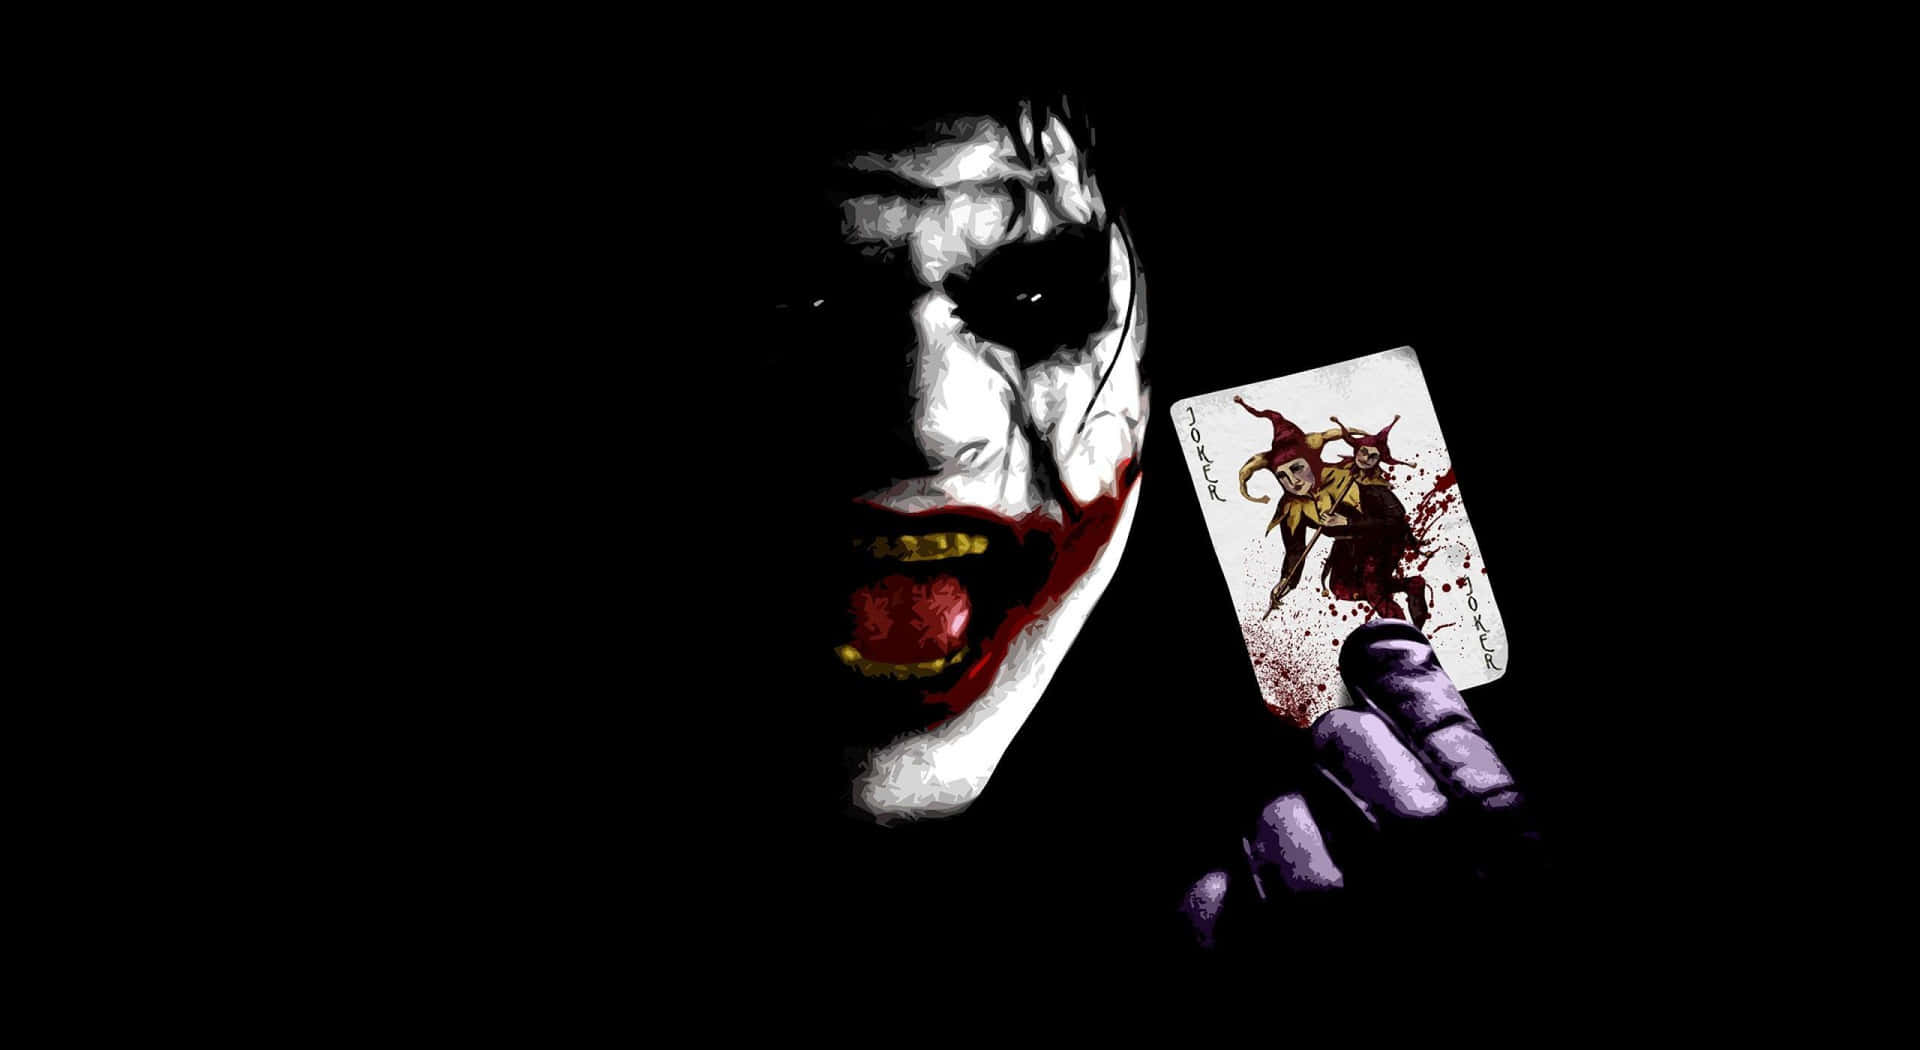 The Joker Laughing Maniacally In Darkness